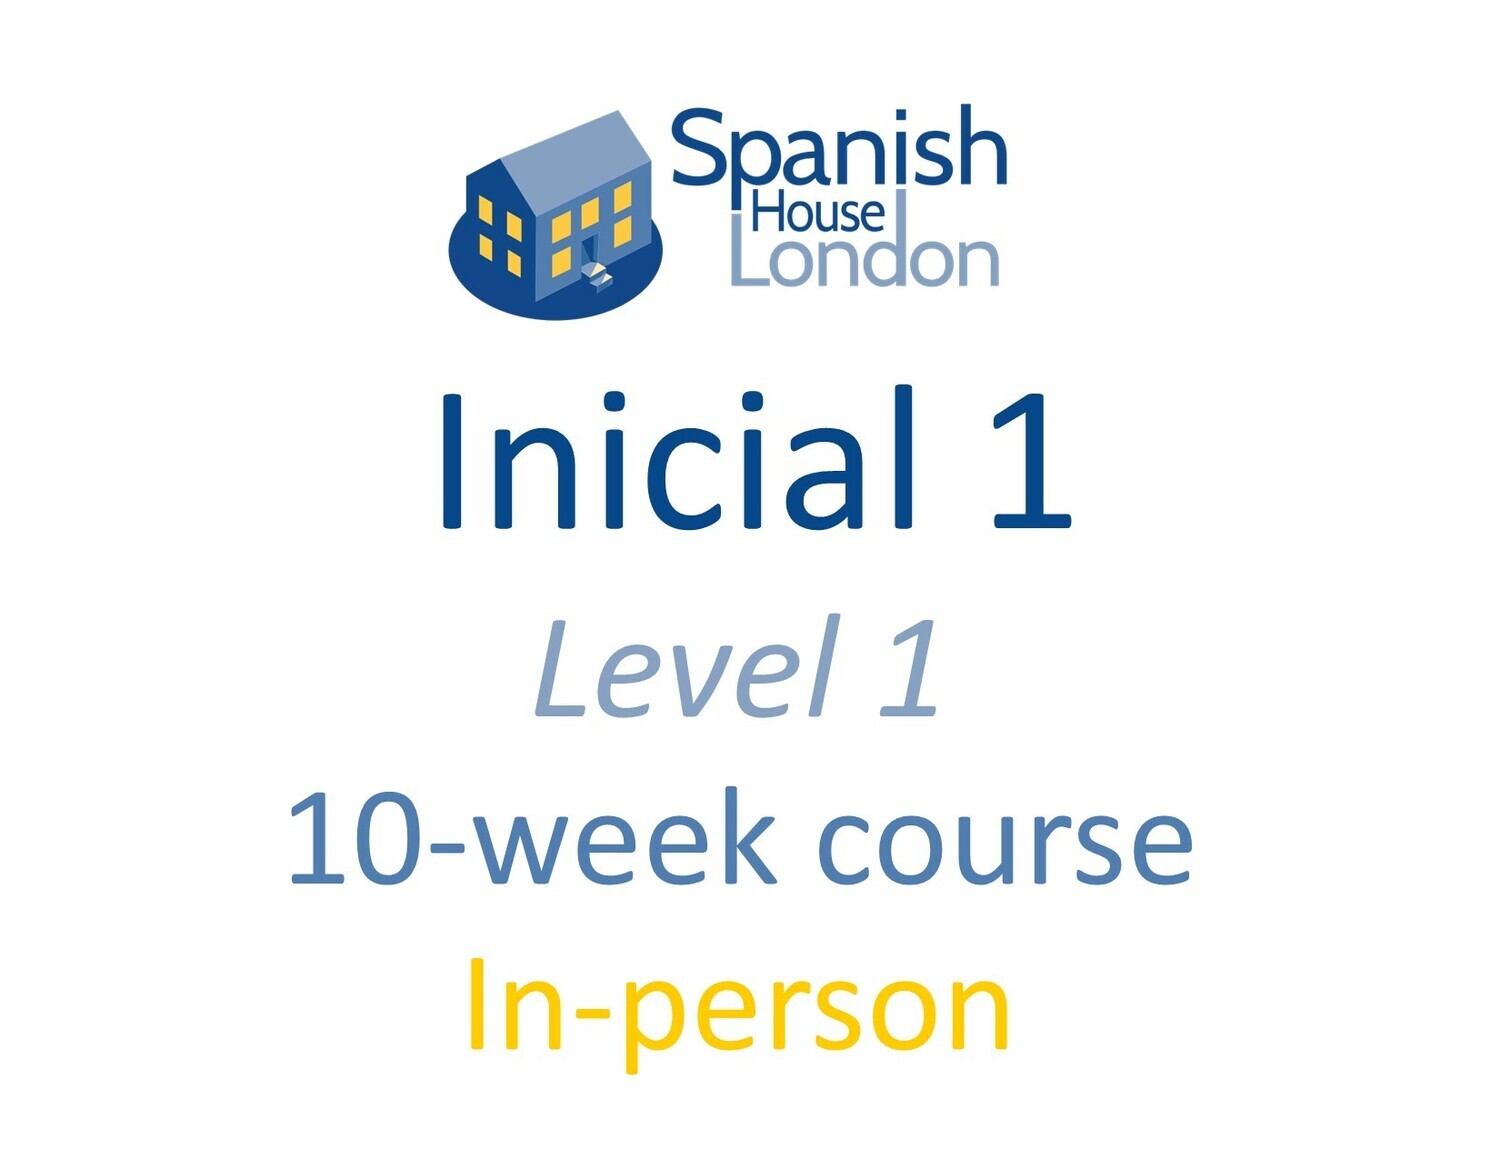 Inicial 1 Course starting on 30th October at 7.30pm in Euston / King's Cross